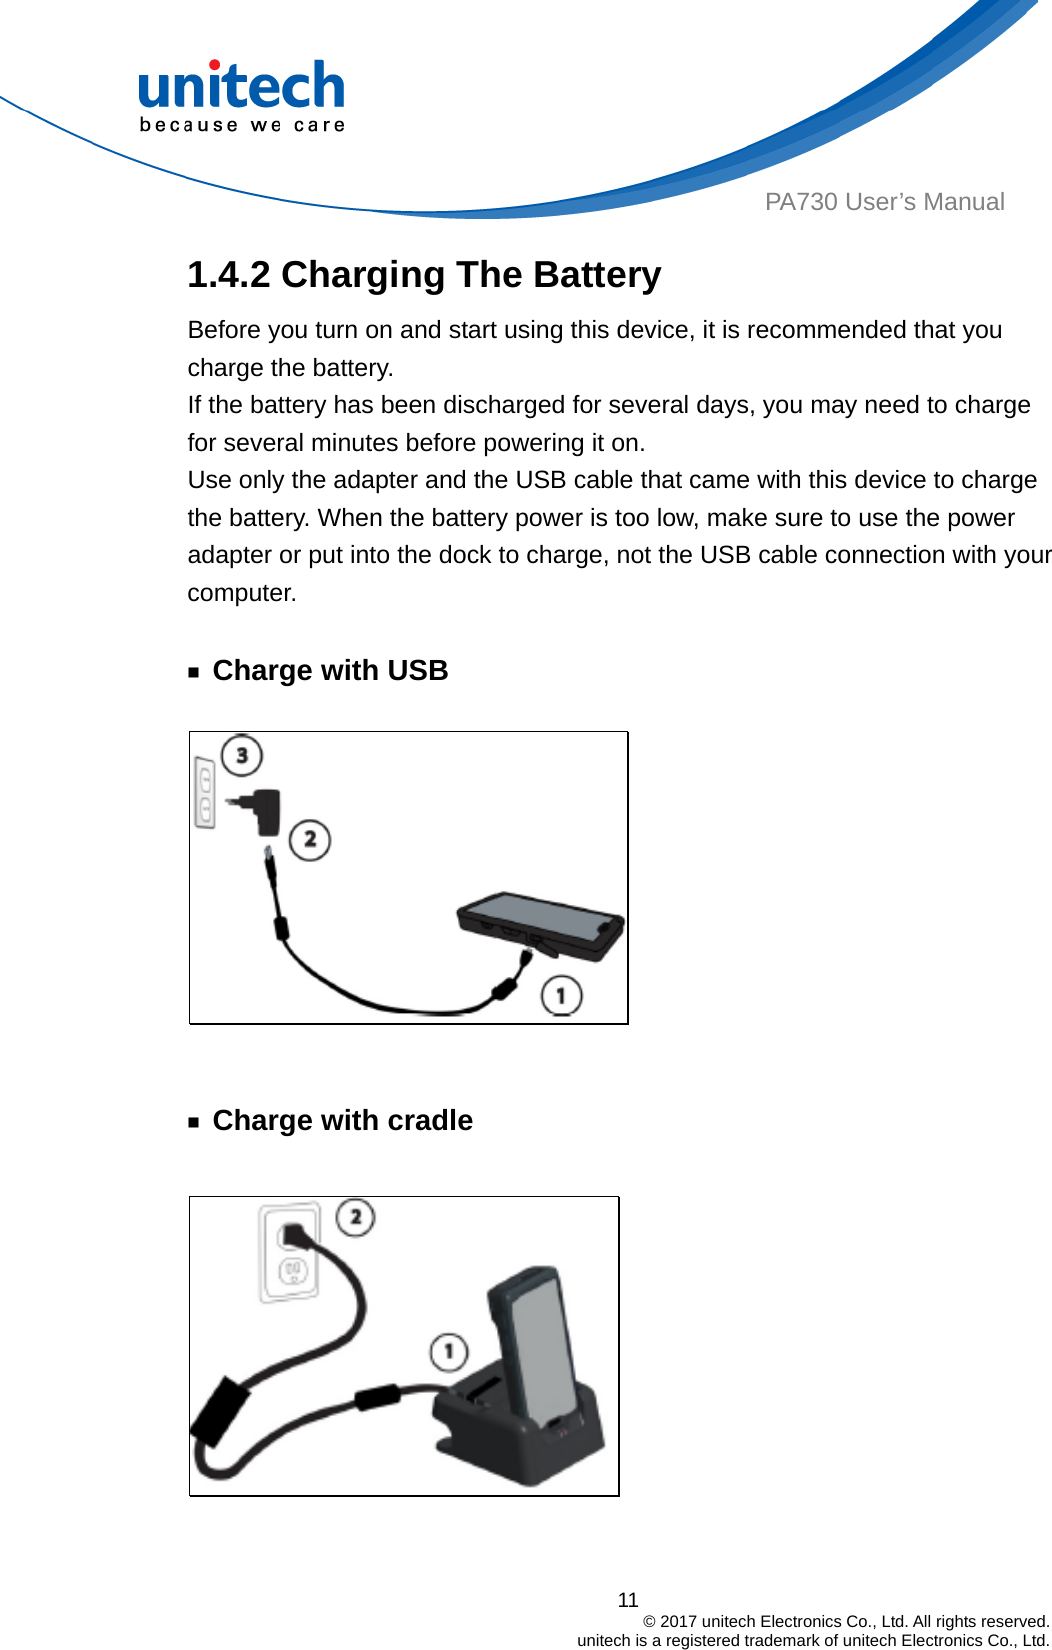  PA730 User’s Manual 1.4.2 Charging The Battery Before you turn on and start using this device, it is recommended that you charge the battery. If the battery has been discharged for several days, you may need to charge for several minutes before powering it on. Use only the adapter and the USB cable that came with this device to charge the battery. When the battery power is too low, make sure to use the power adapter or put into the dock to charge, not the USB cable connection with your computer.  ￭ Charge with USB     ￭ Charge with cradle   11                                         © 2017 unitech Electronics Co., Ltd. All rights reserved.                                             unitech is a registered trademark of unitech Electronics Co., Ltd. 